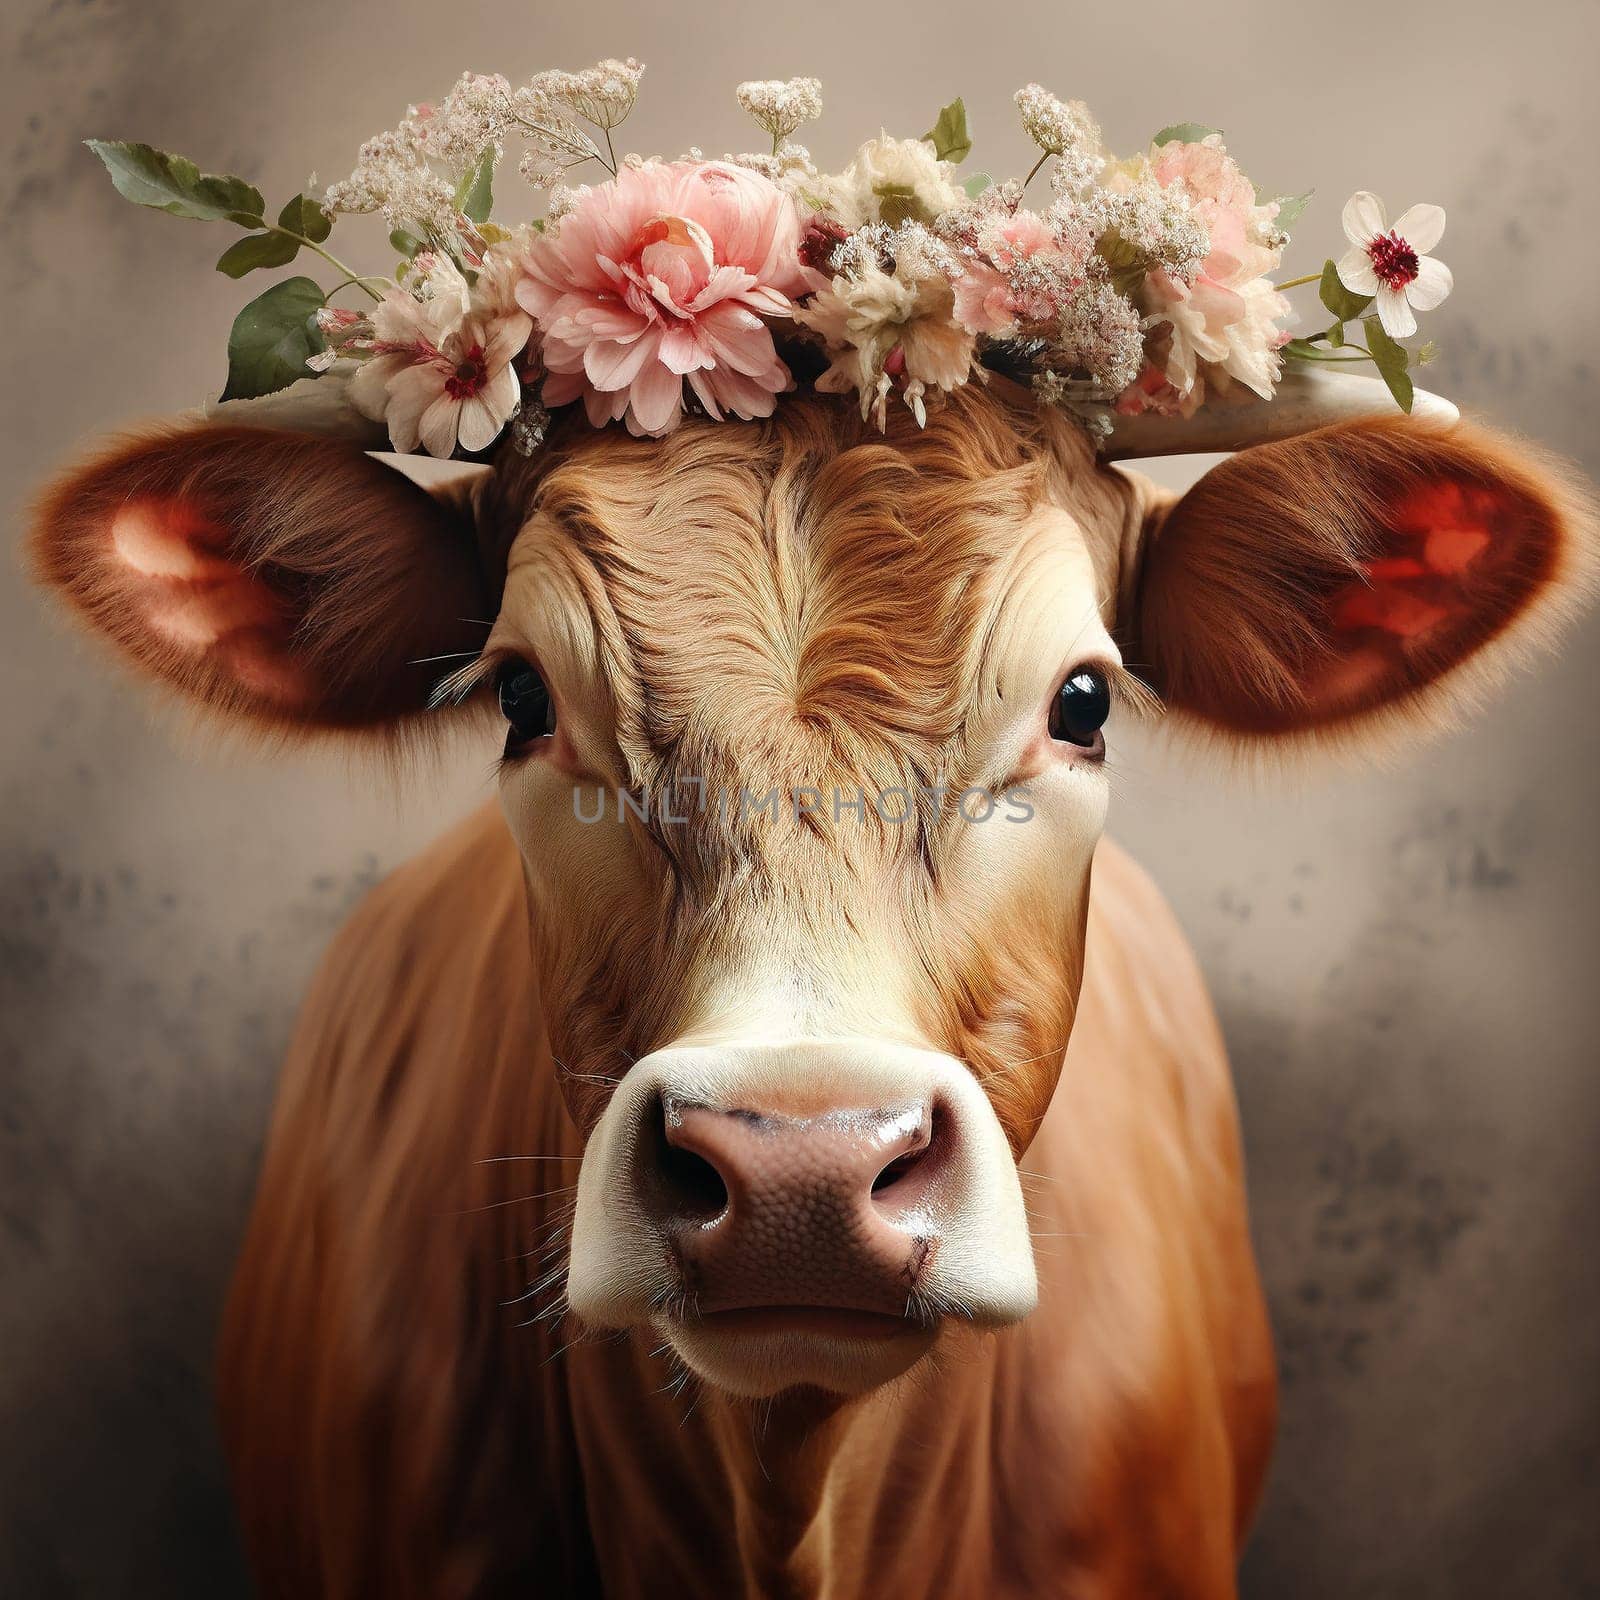 Portrait of a cow with big horns. Close-up of the muzzle of a cow decorated with bright flowers. High quality illustration